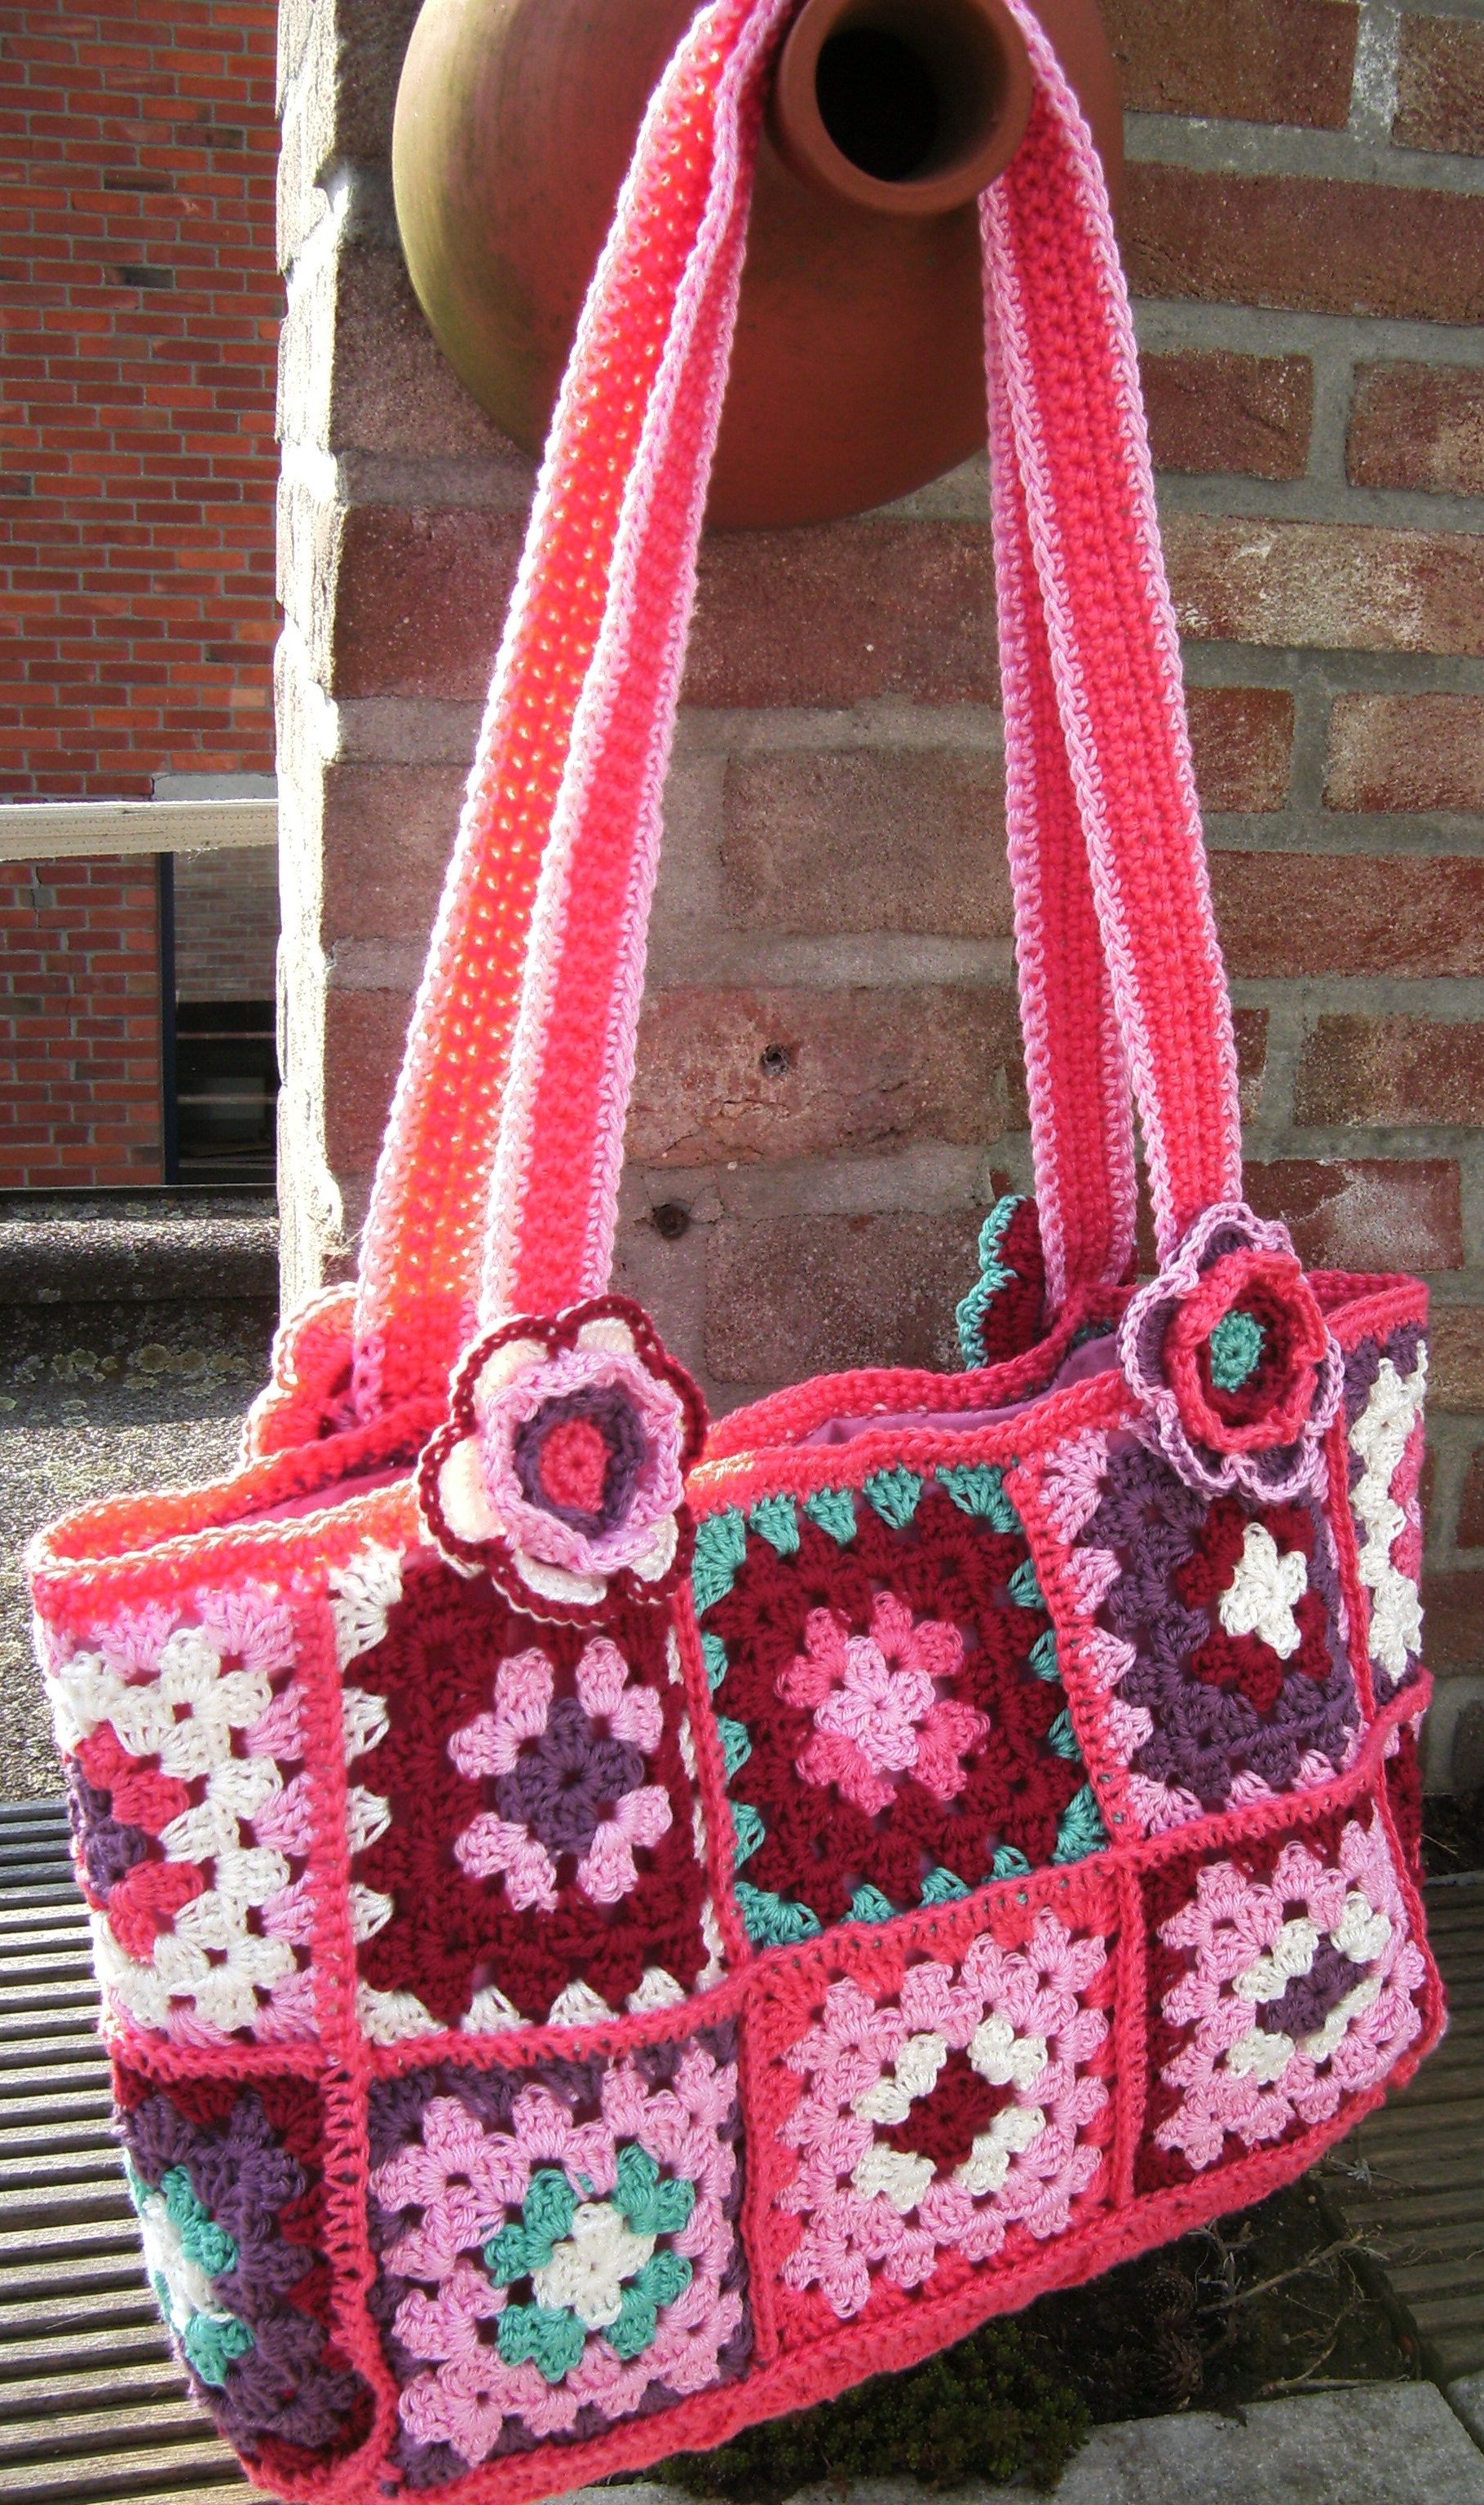 53+ Awesome and Cool Crochet Bag Pattern Design Ideas - Page 15 of 51